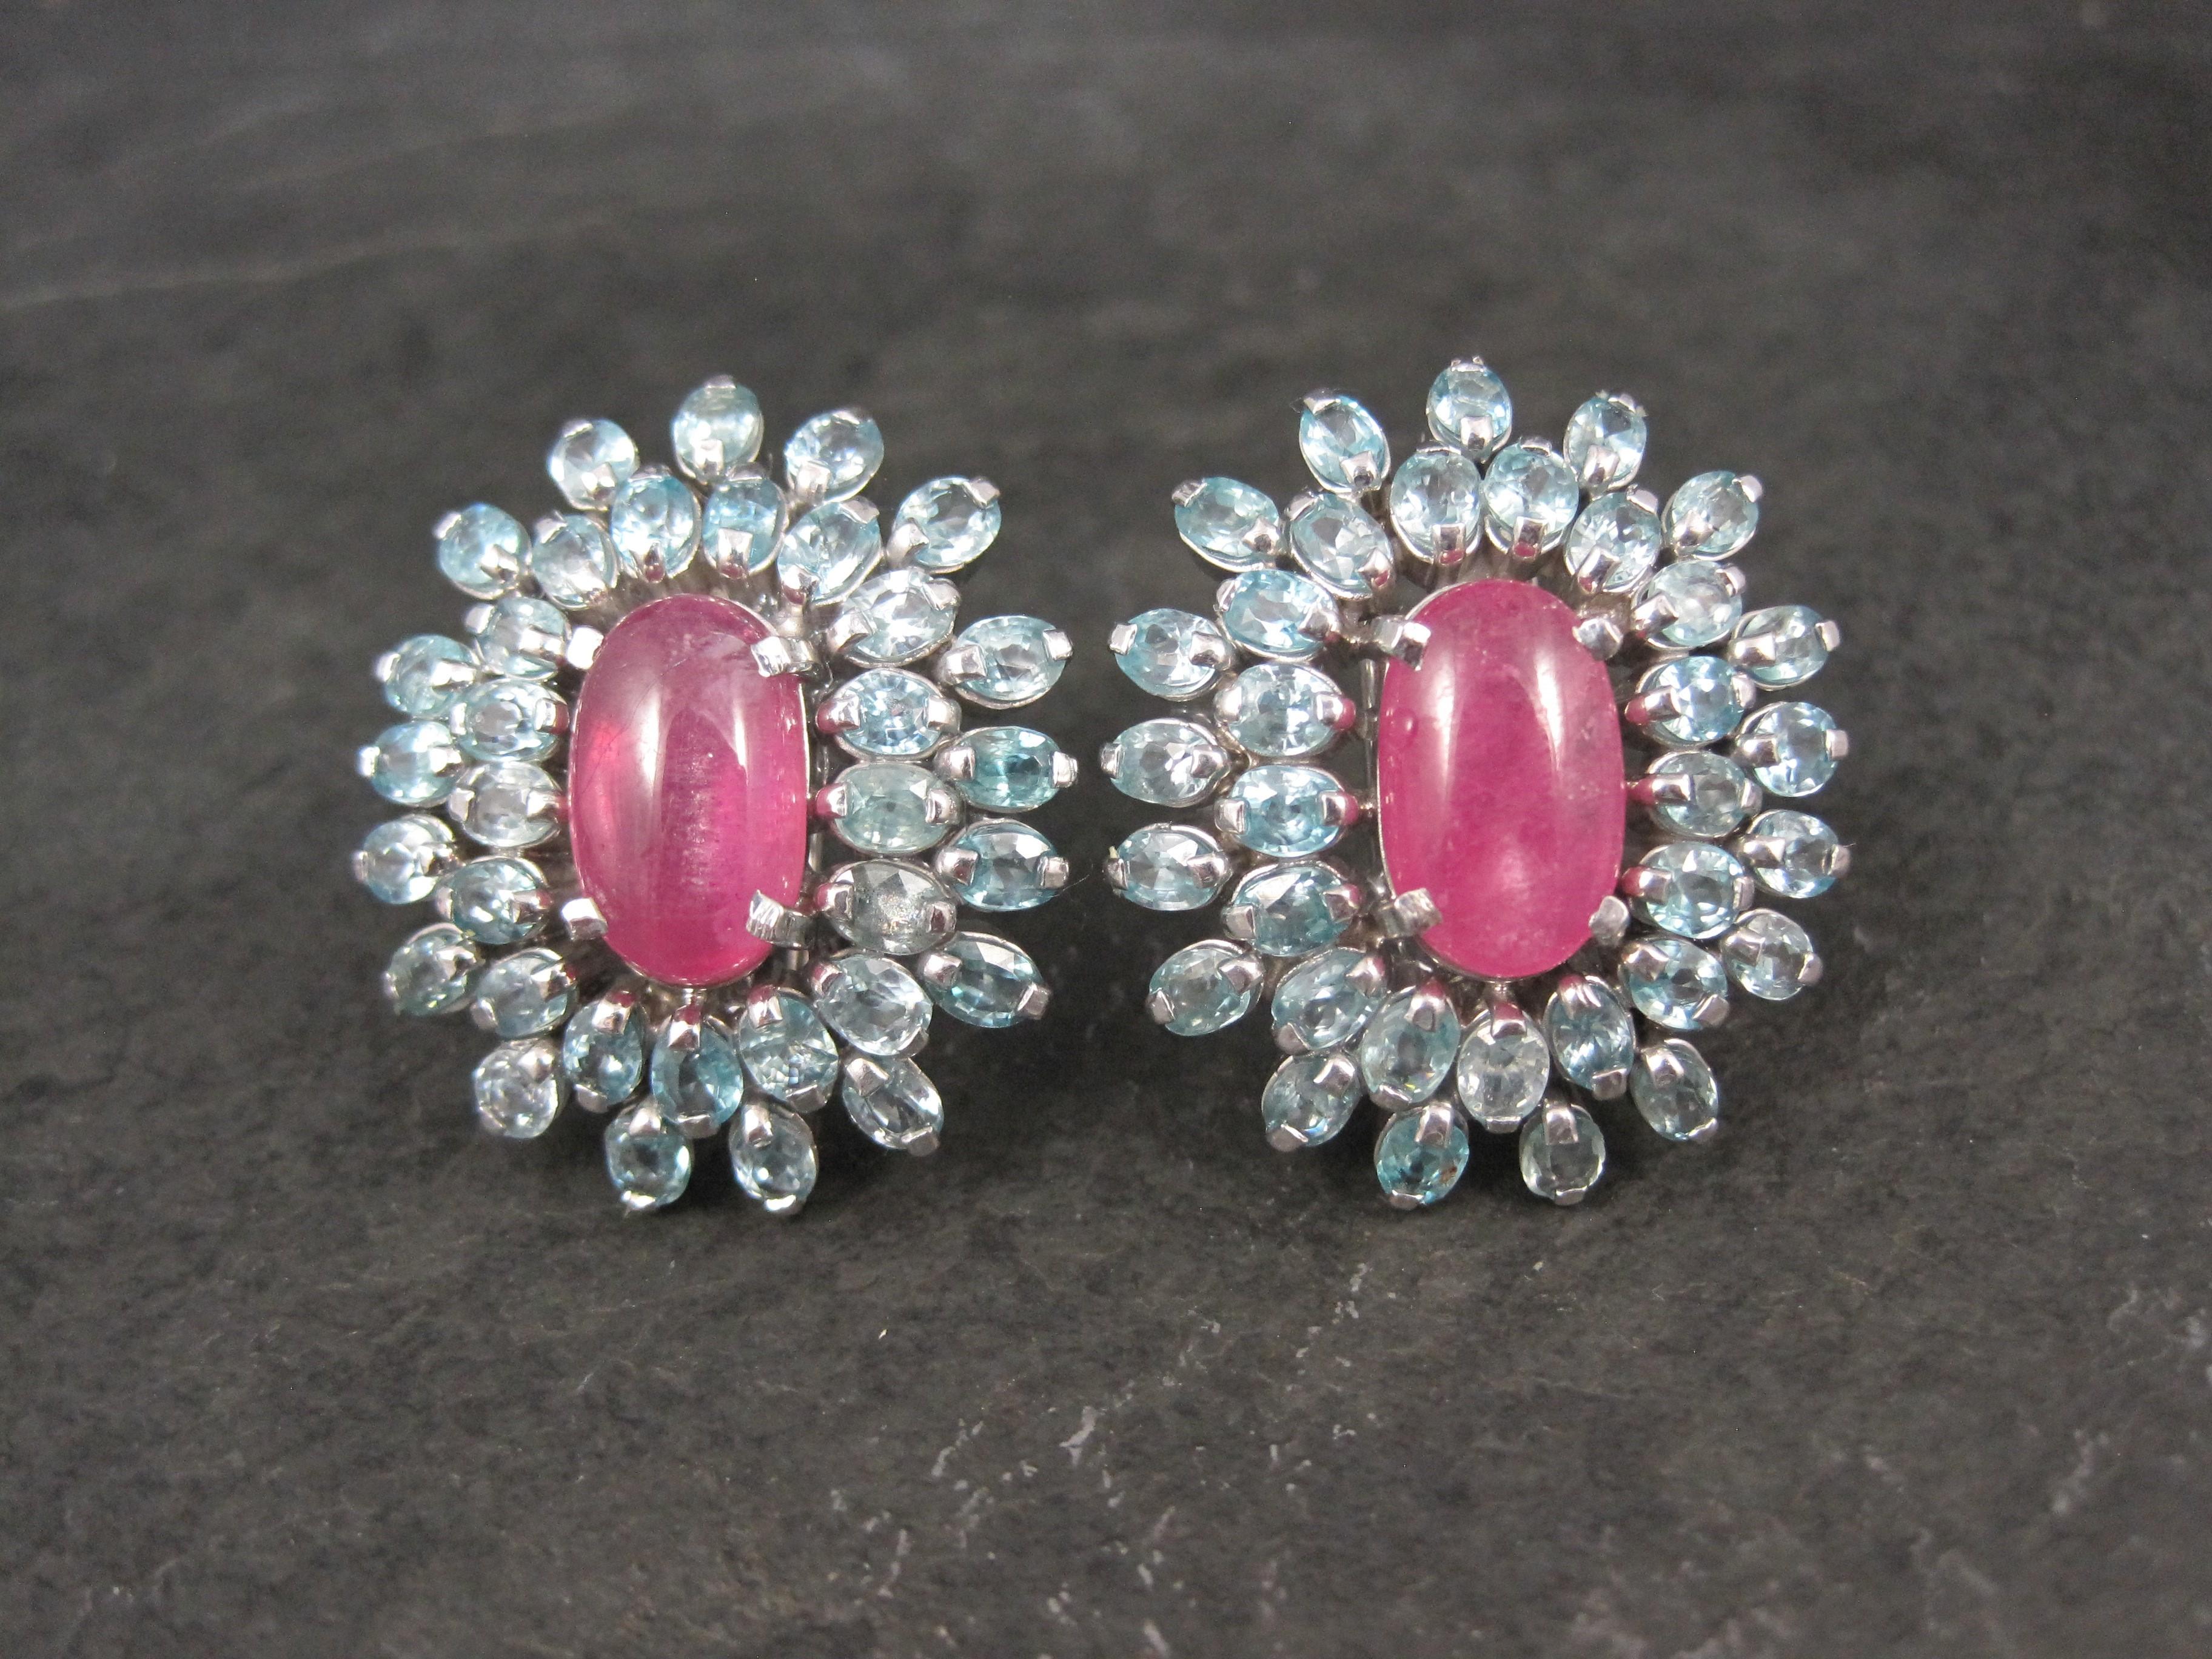 These gorgeous estate earrings are sterling silver with French backs.
They feature 14x9mm cabochon cut pink sapphires accented by a halo of 4x3mm blue topaz gemstones.

Measurements: 1 1/8 by 1 1/4 inches
Weight: 24.4 grams

Marks: 925

Condition: